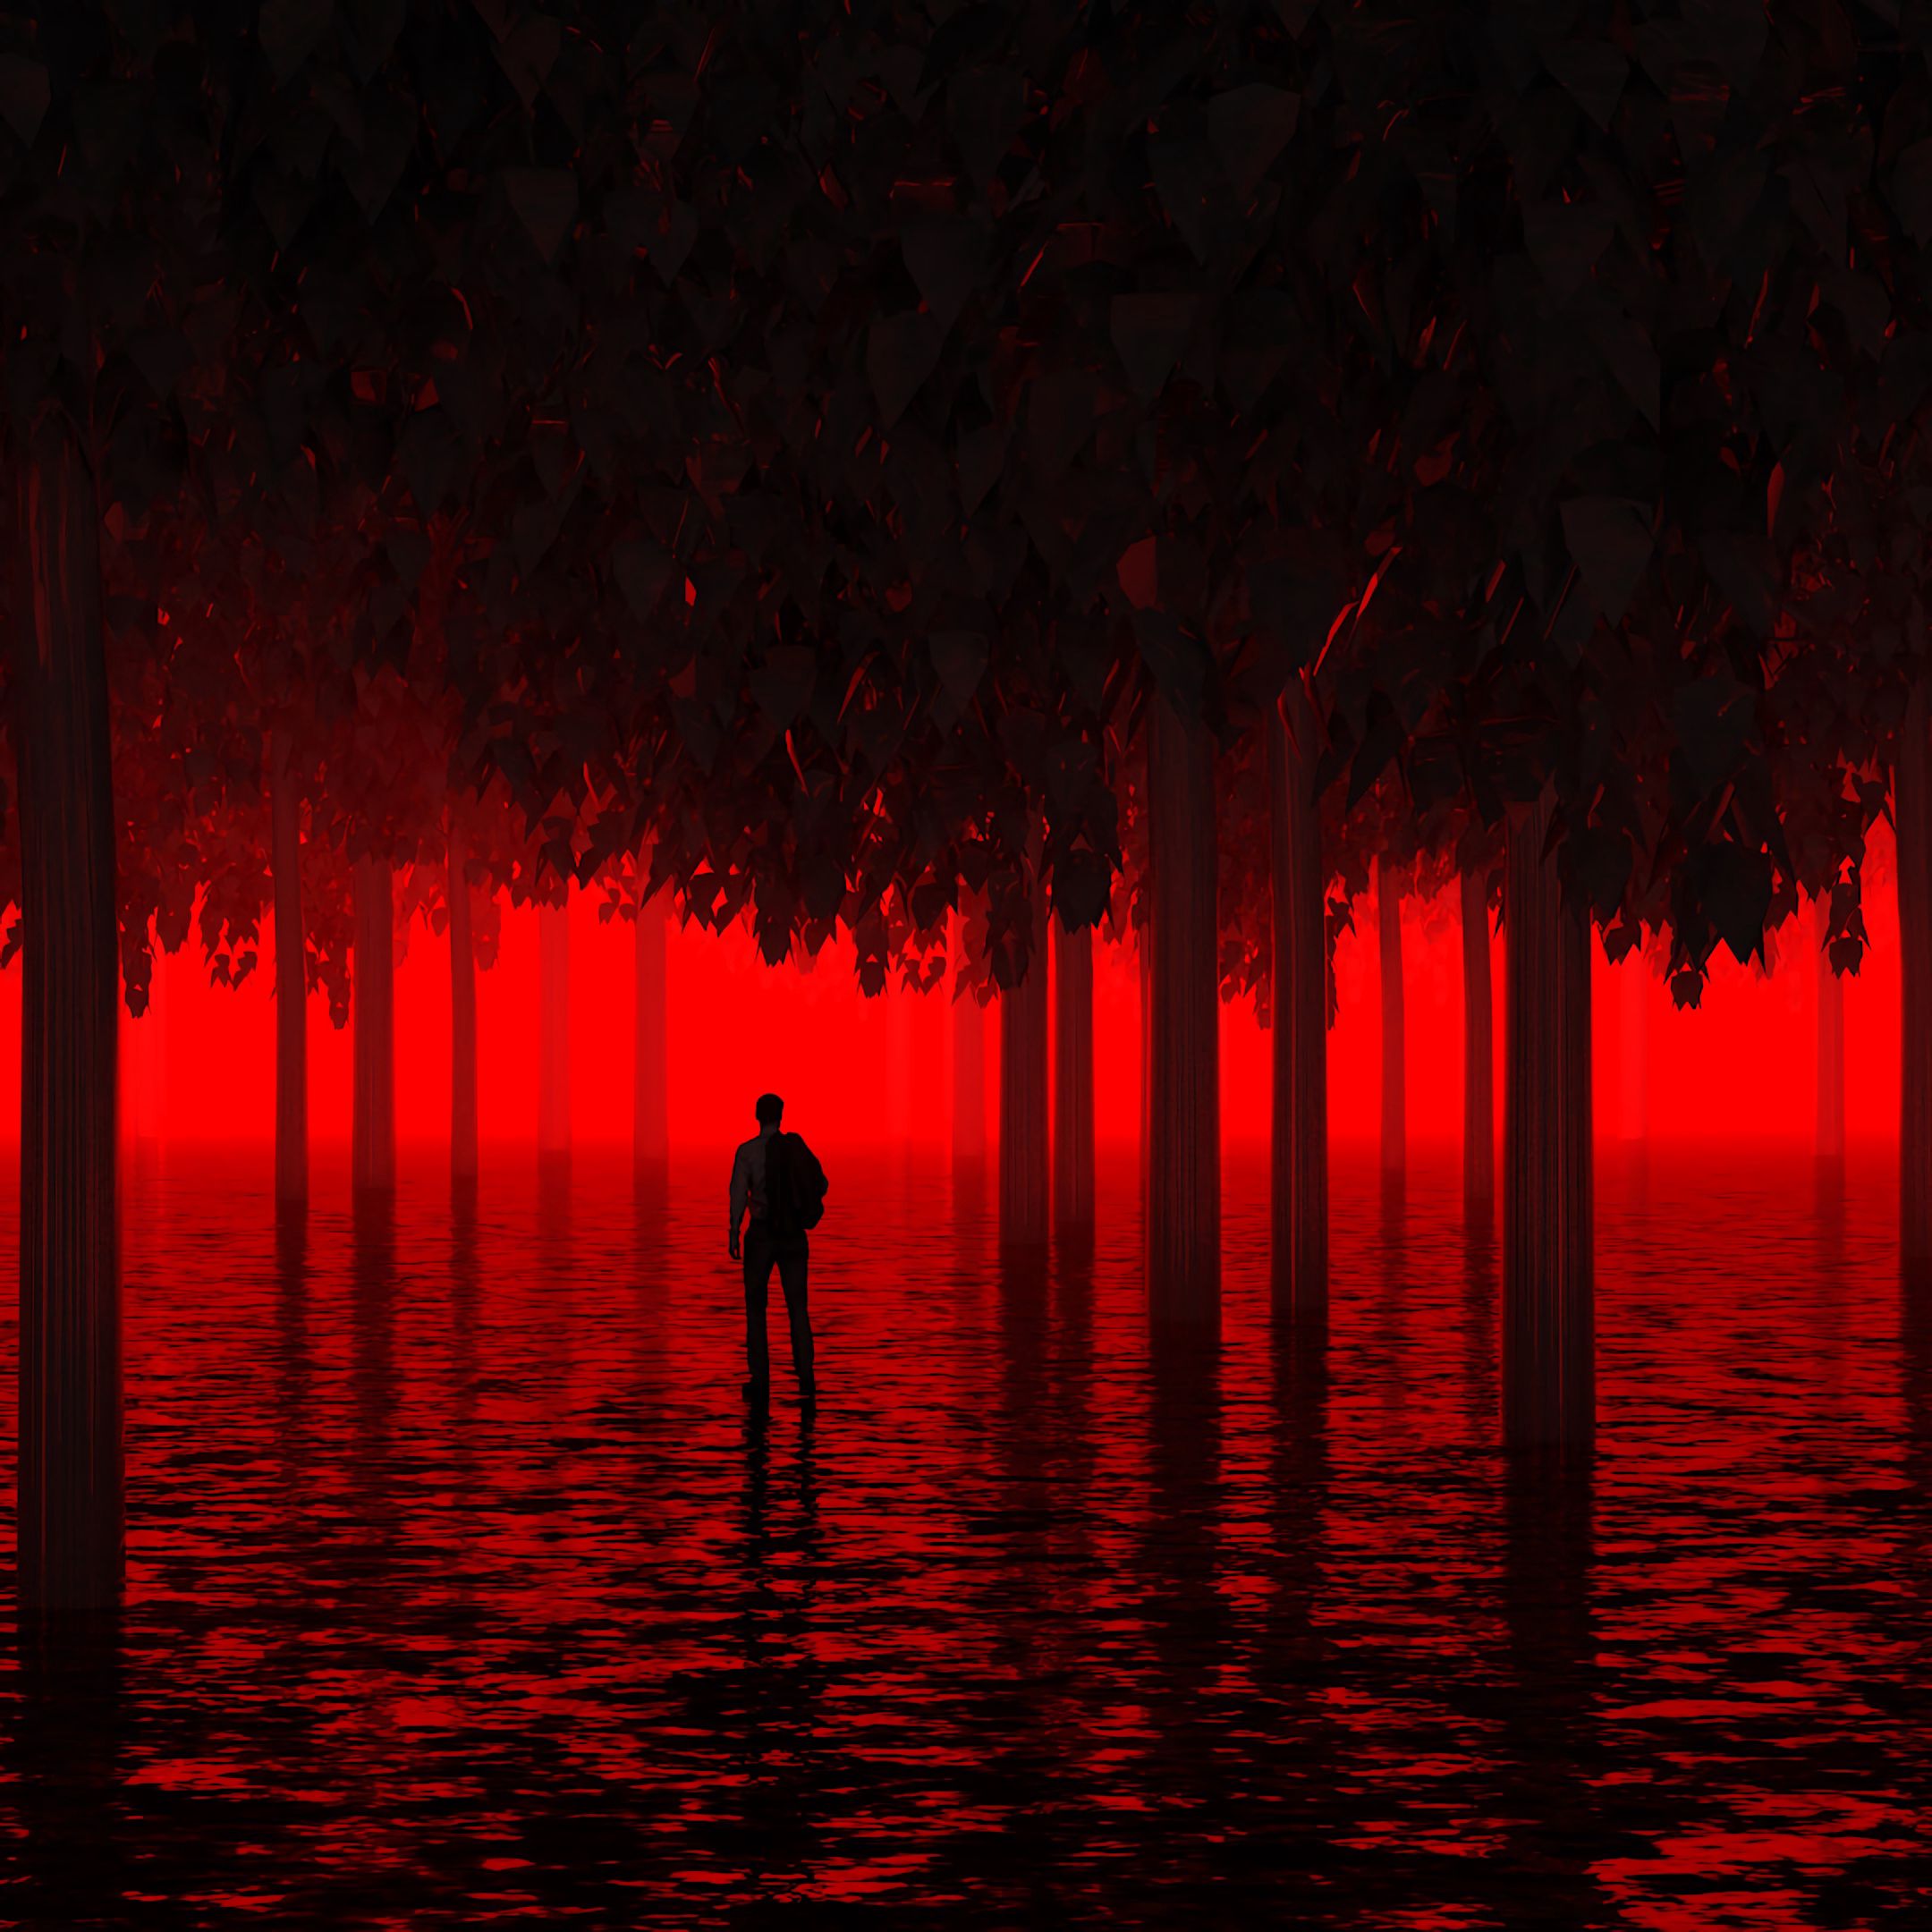 Mobile wallpaper light, neon, human, dark, water, trees, red, shine, person, flooded, submerged